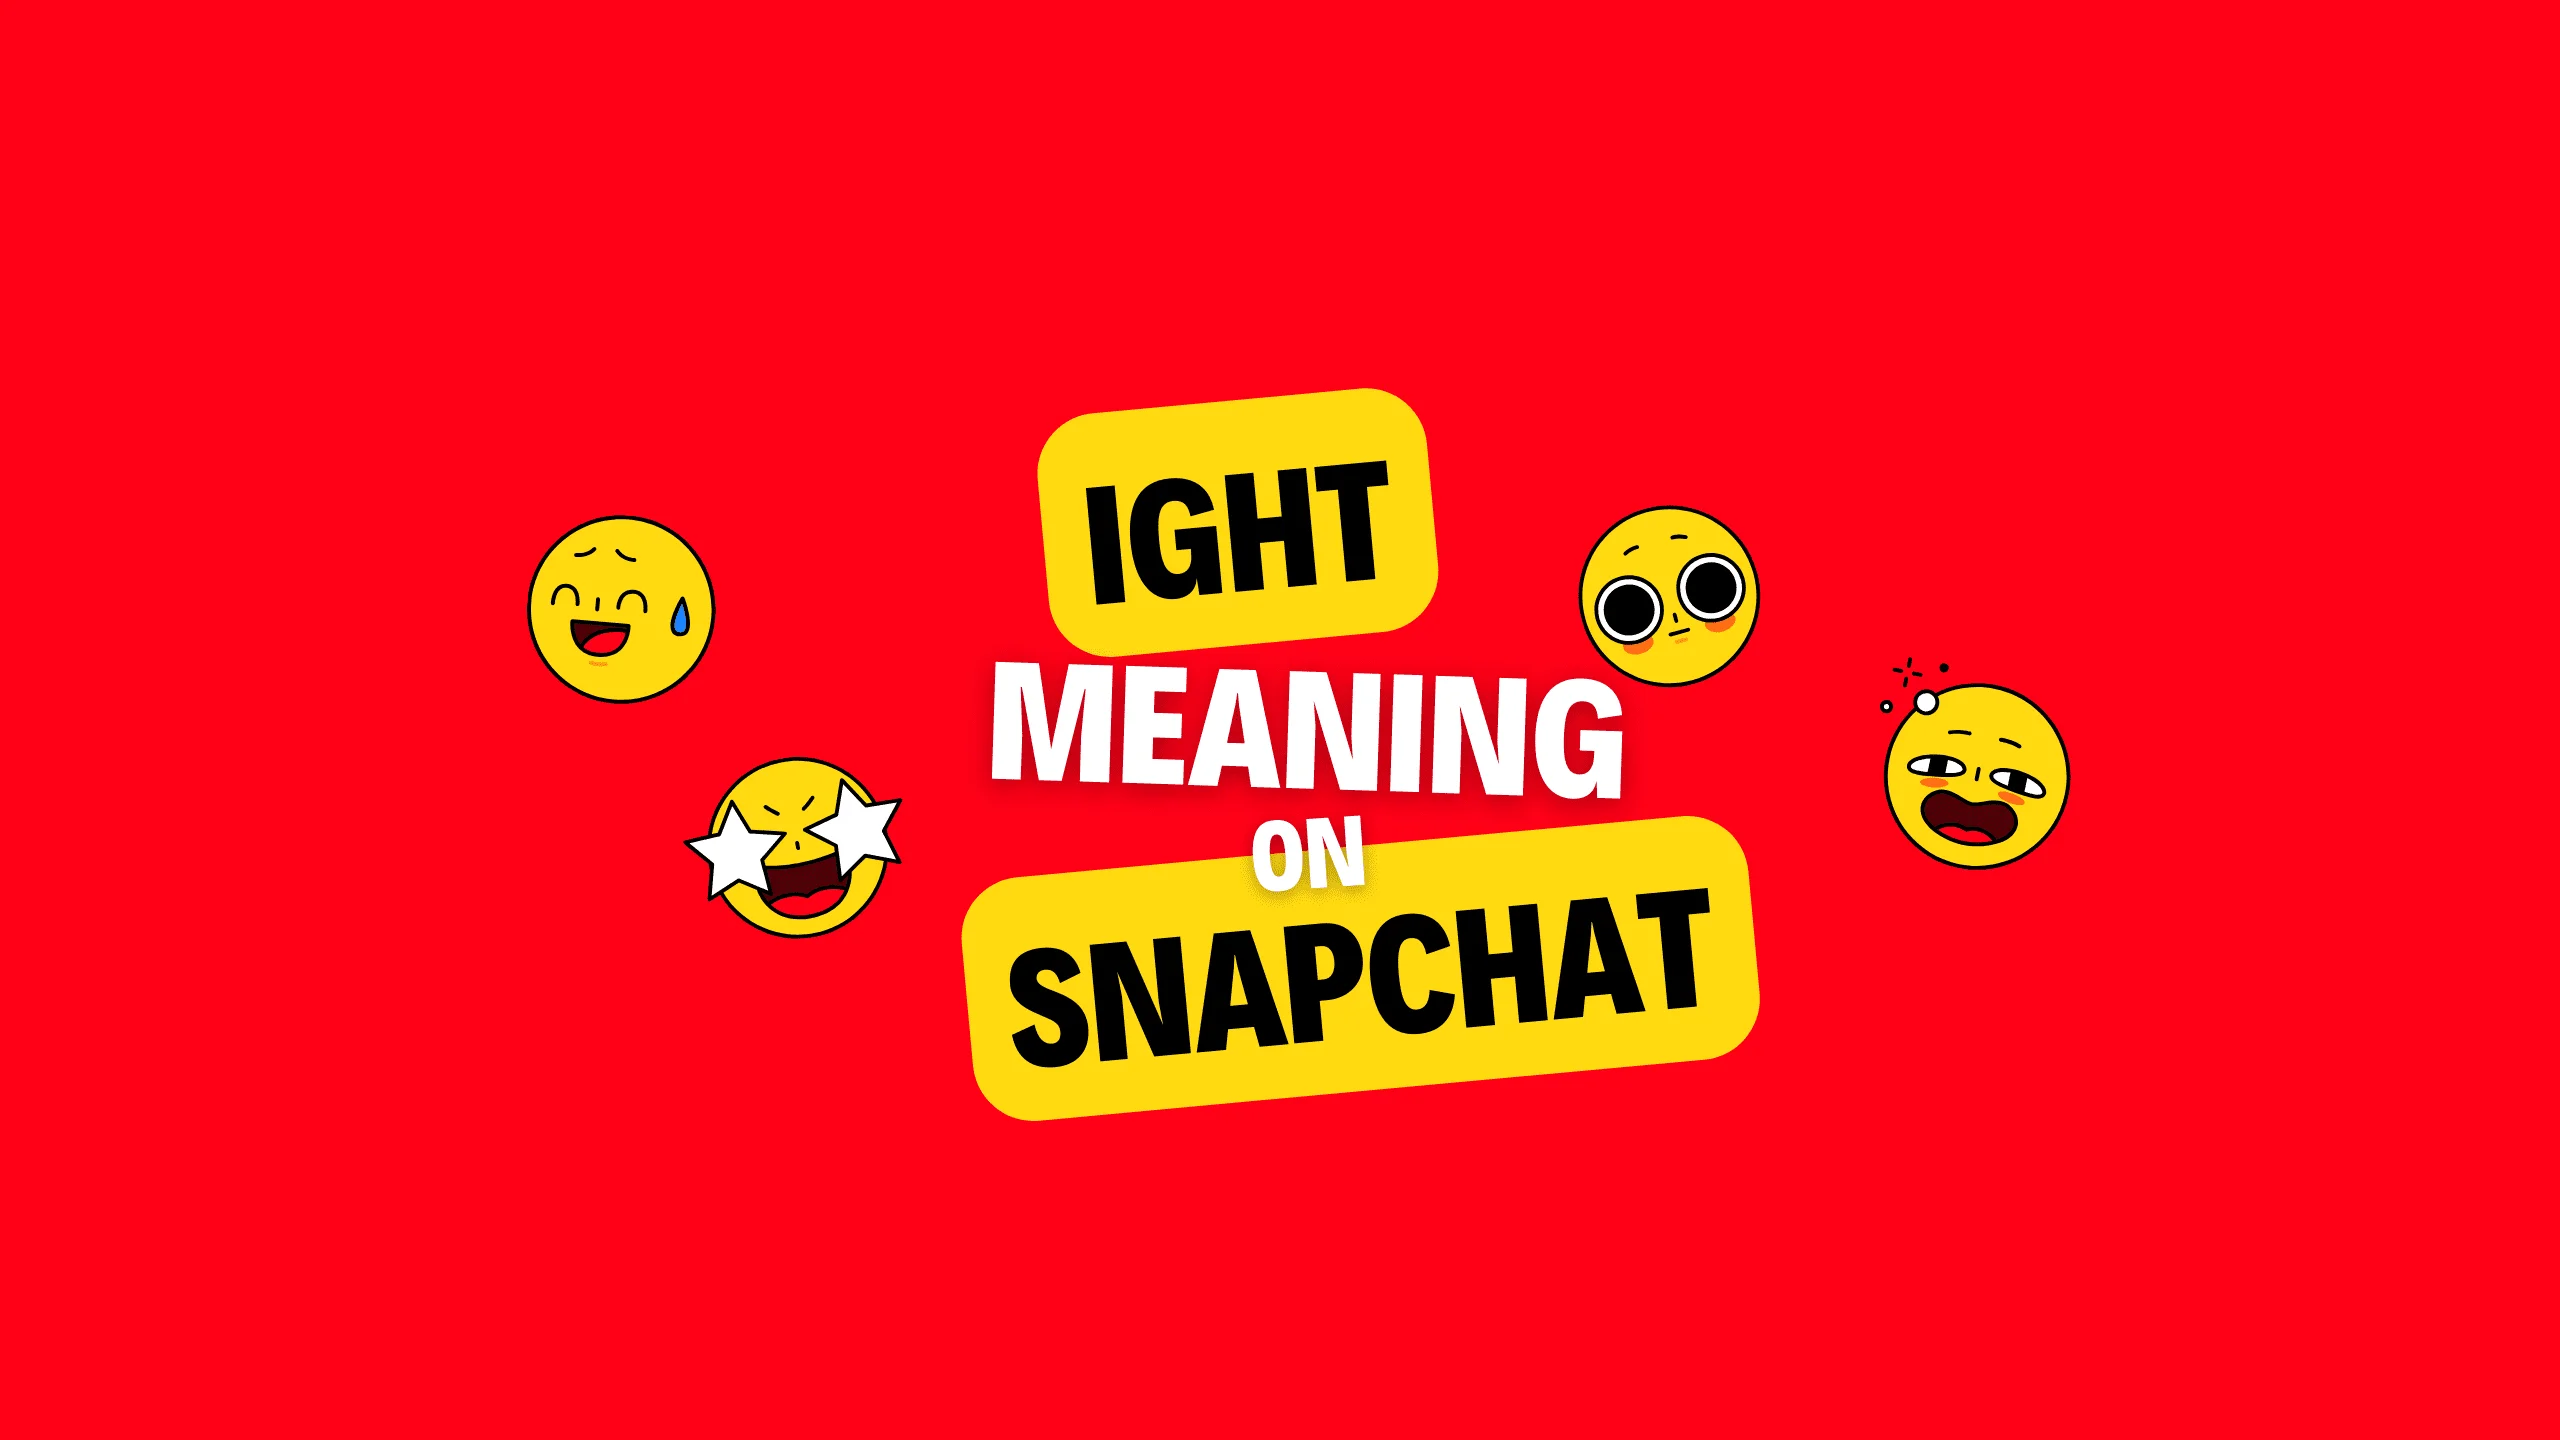 What does IGHT mean on Snapchat